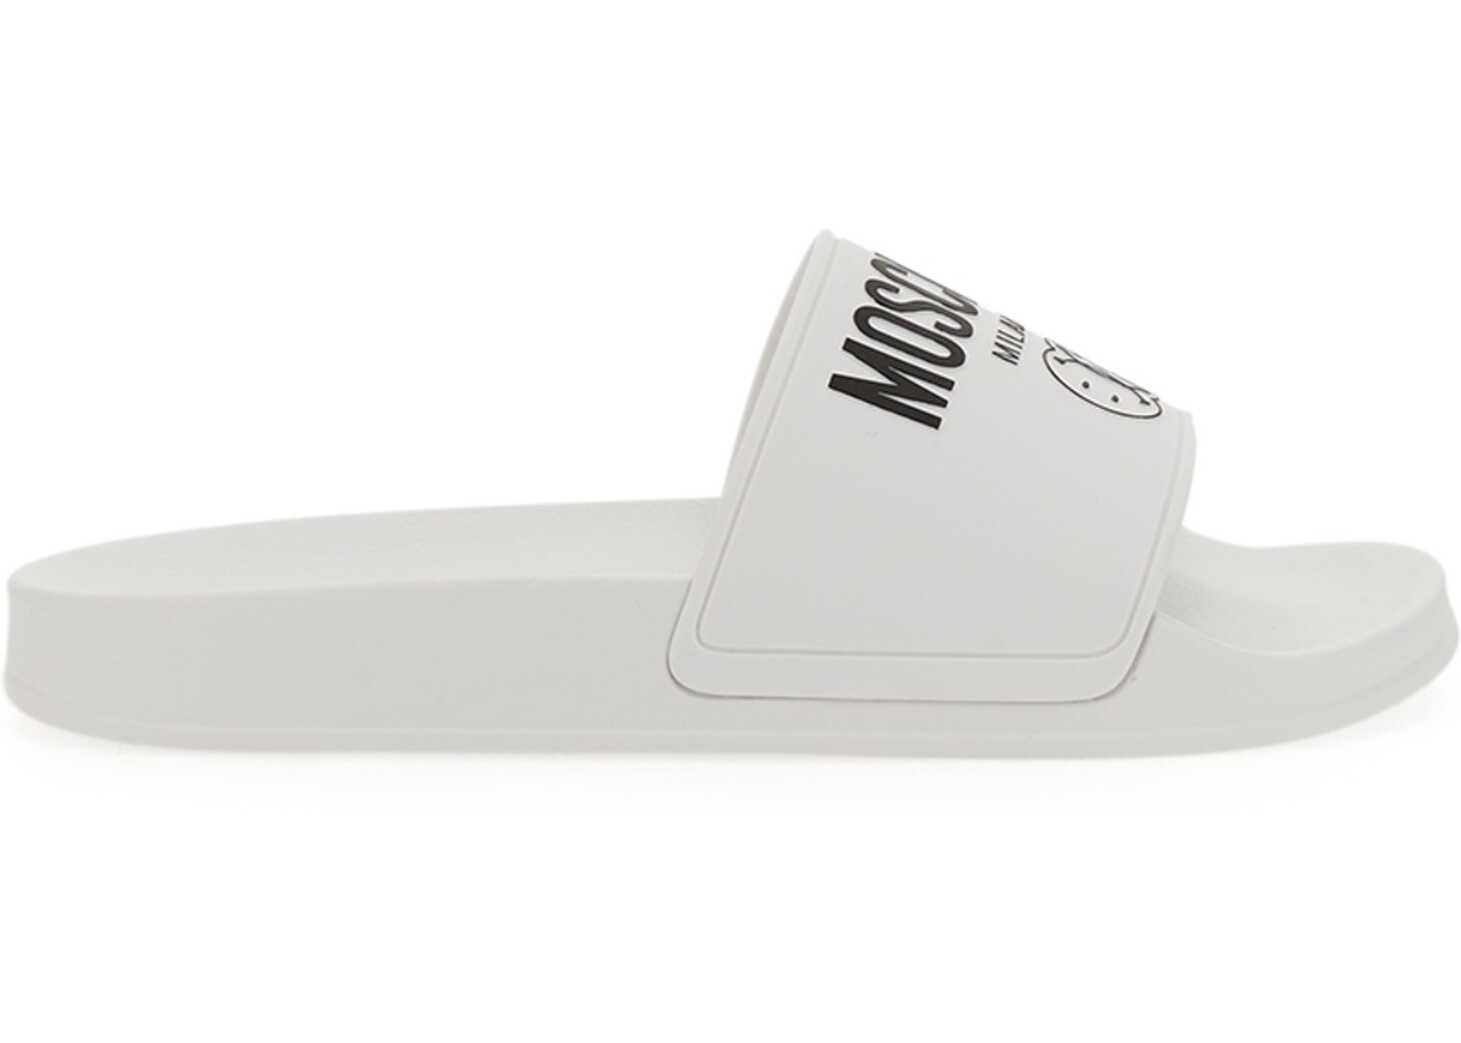 Moschino Slide Sandal With Lettering Logo WHITE b-mall.ro